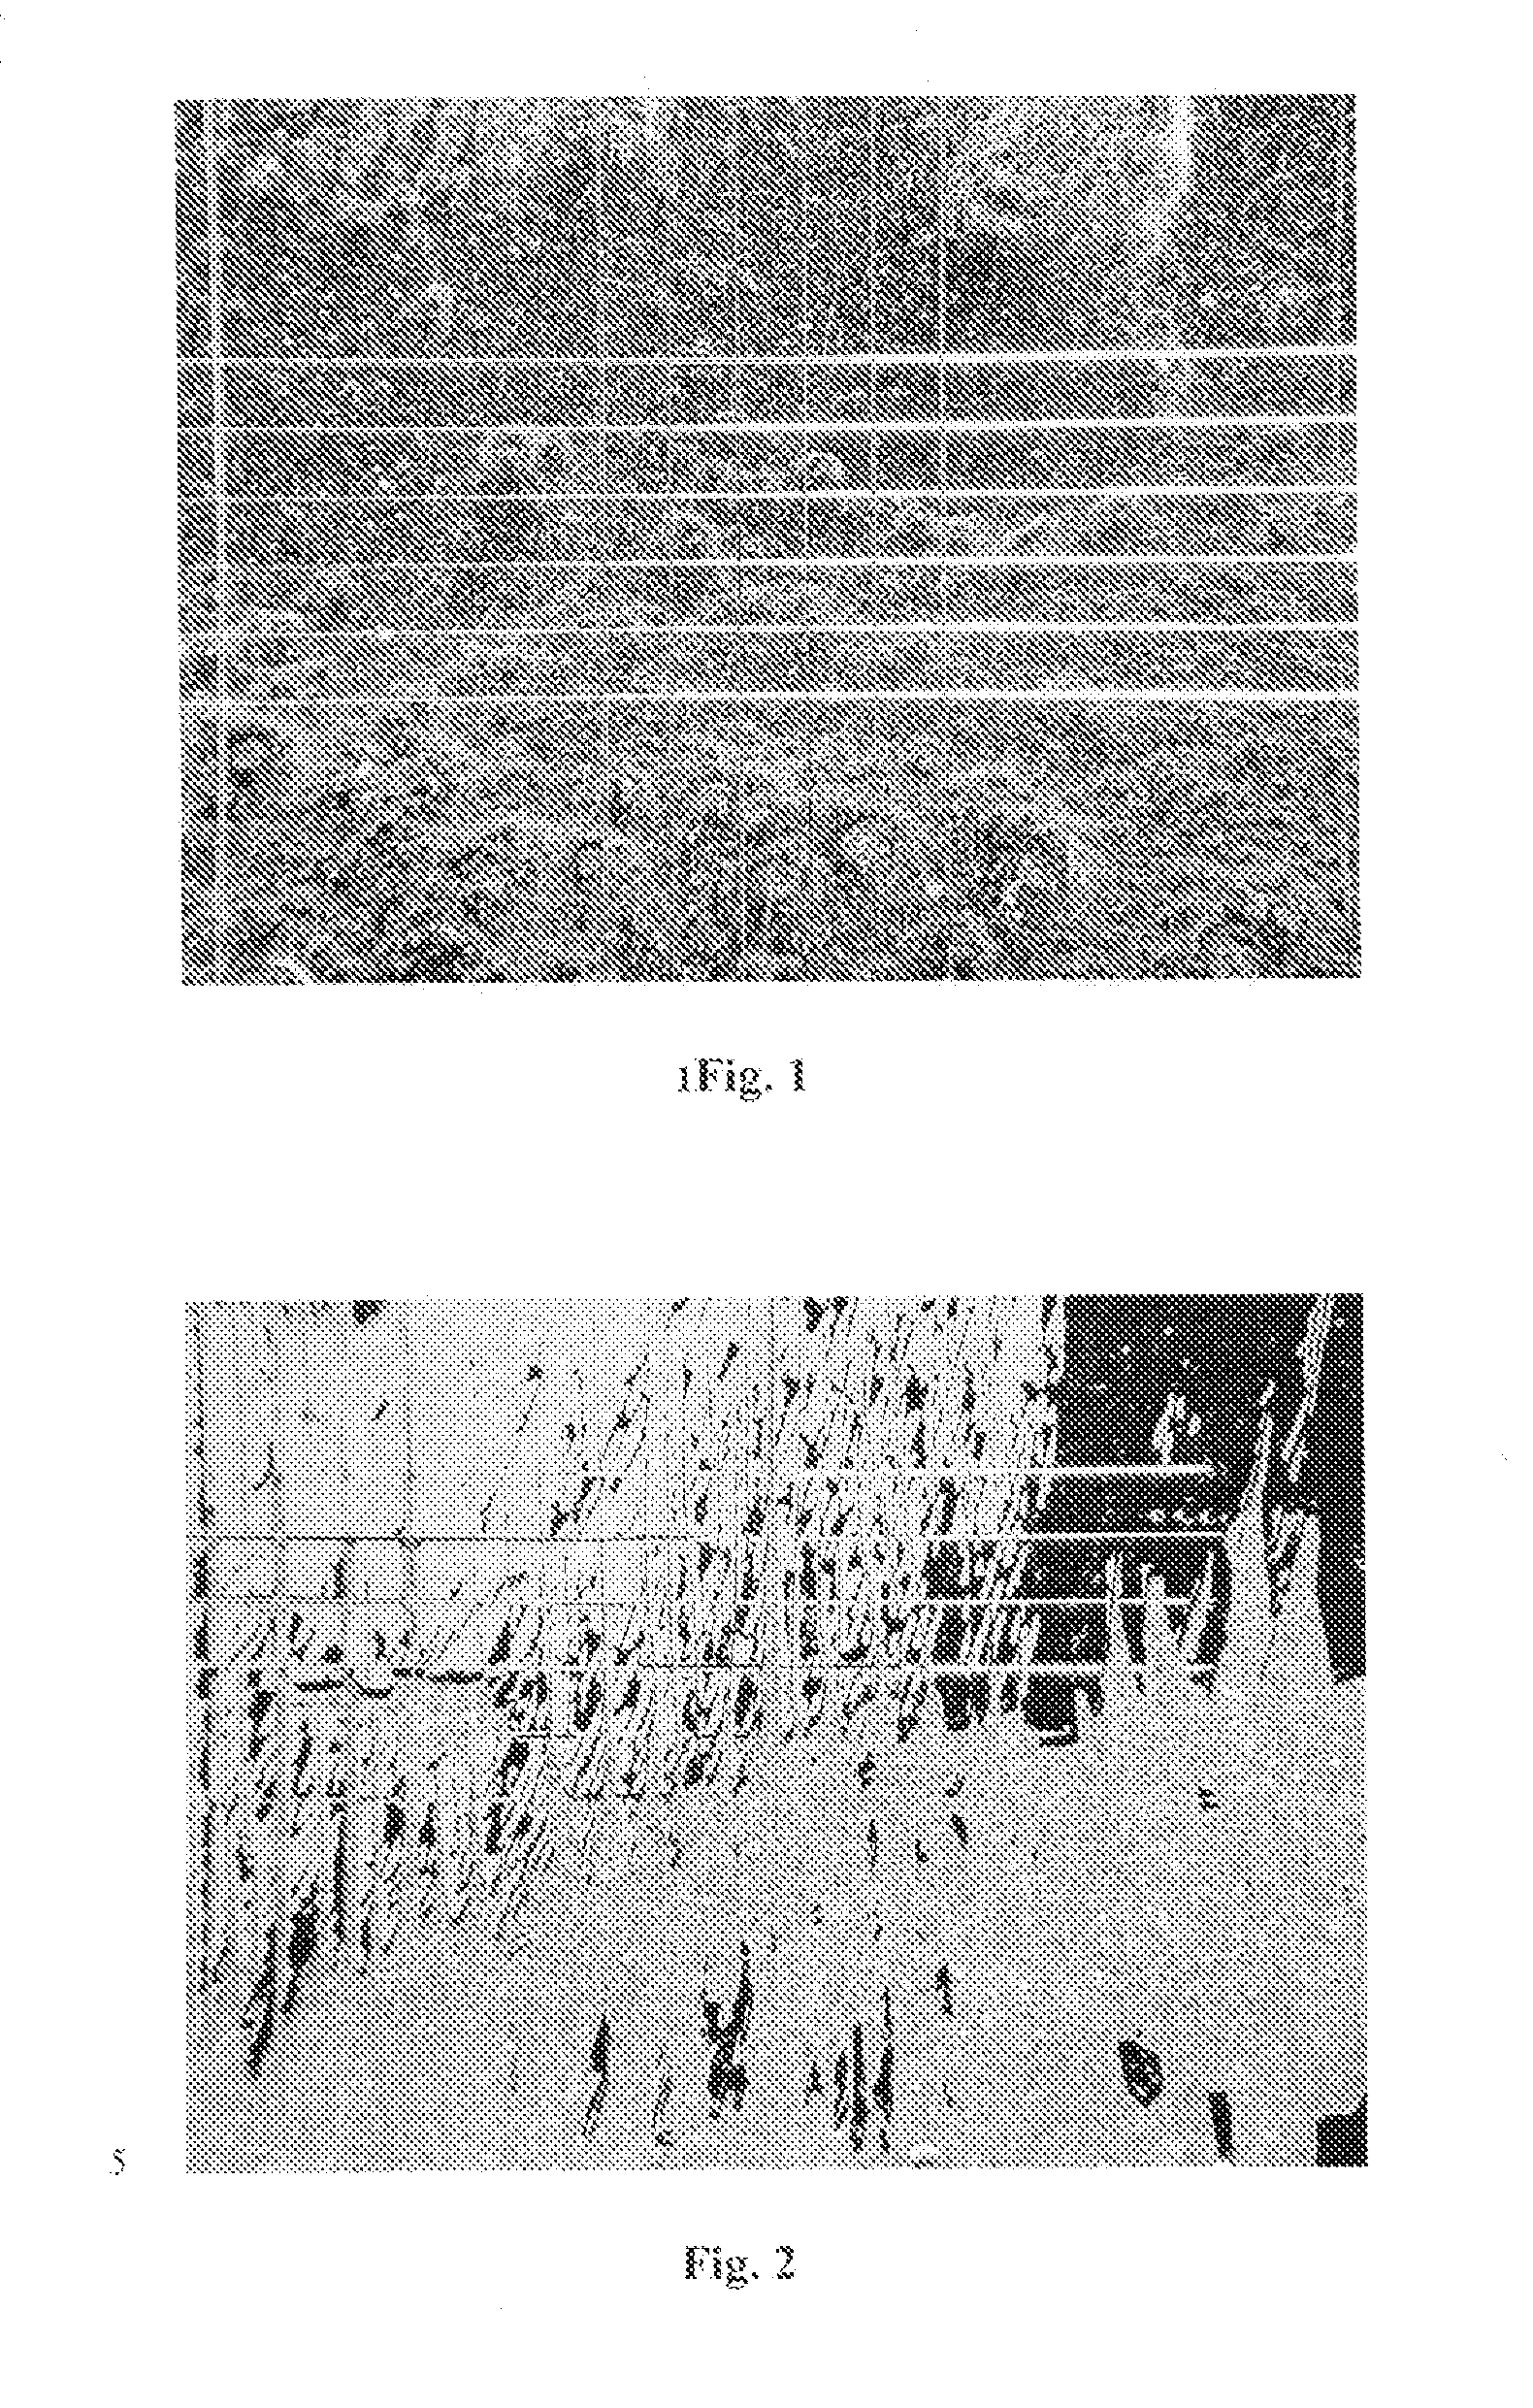 Silver-containing aqueous formulation and its use to produce electrically conductive or reflective coatings